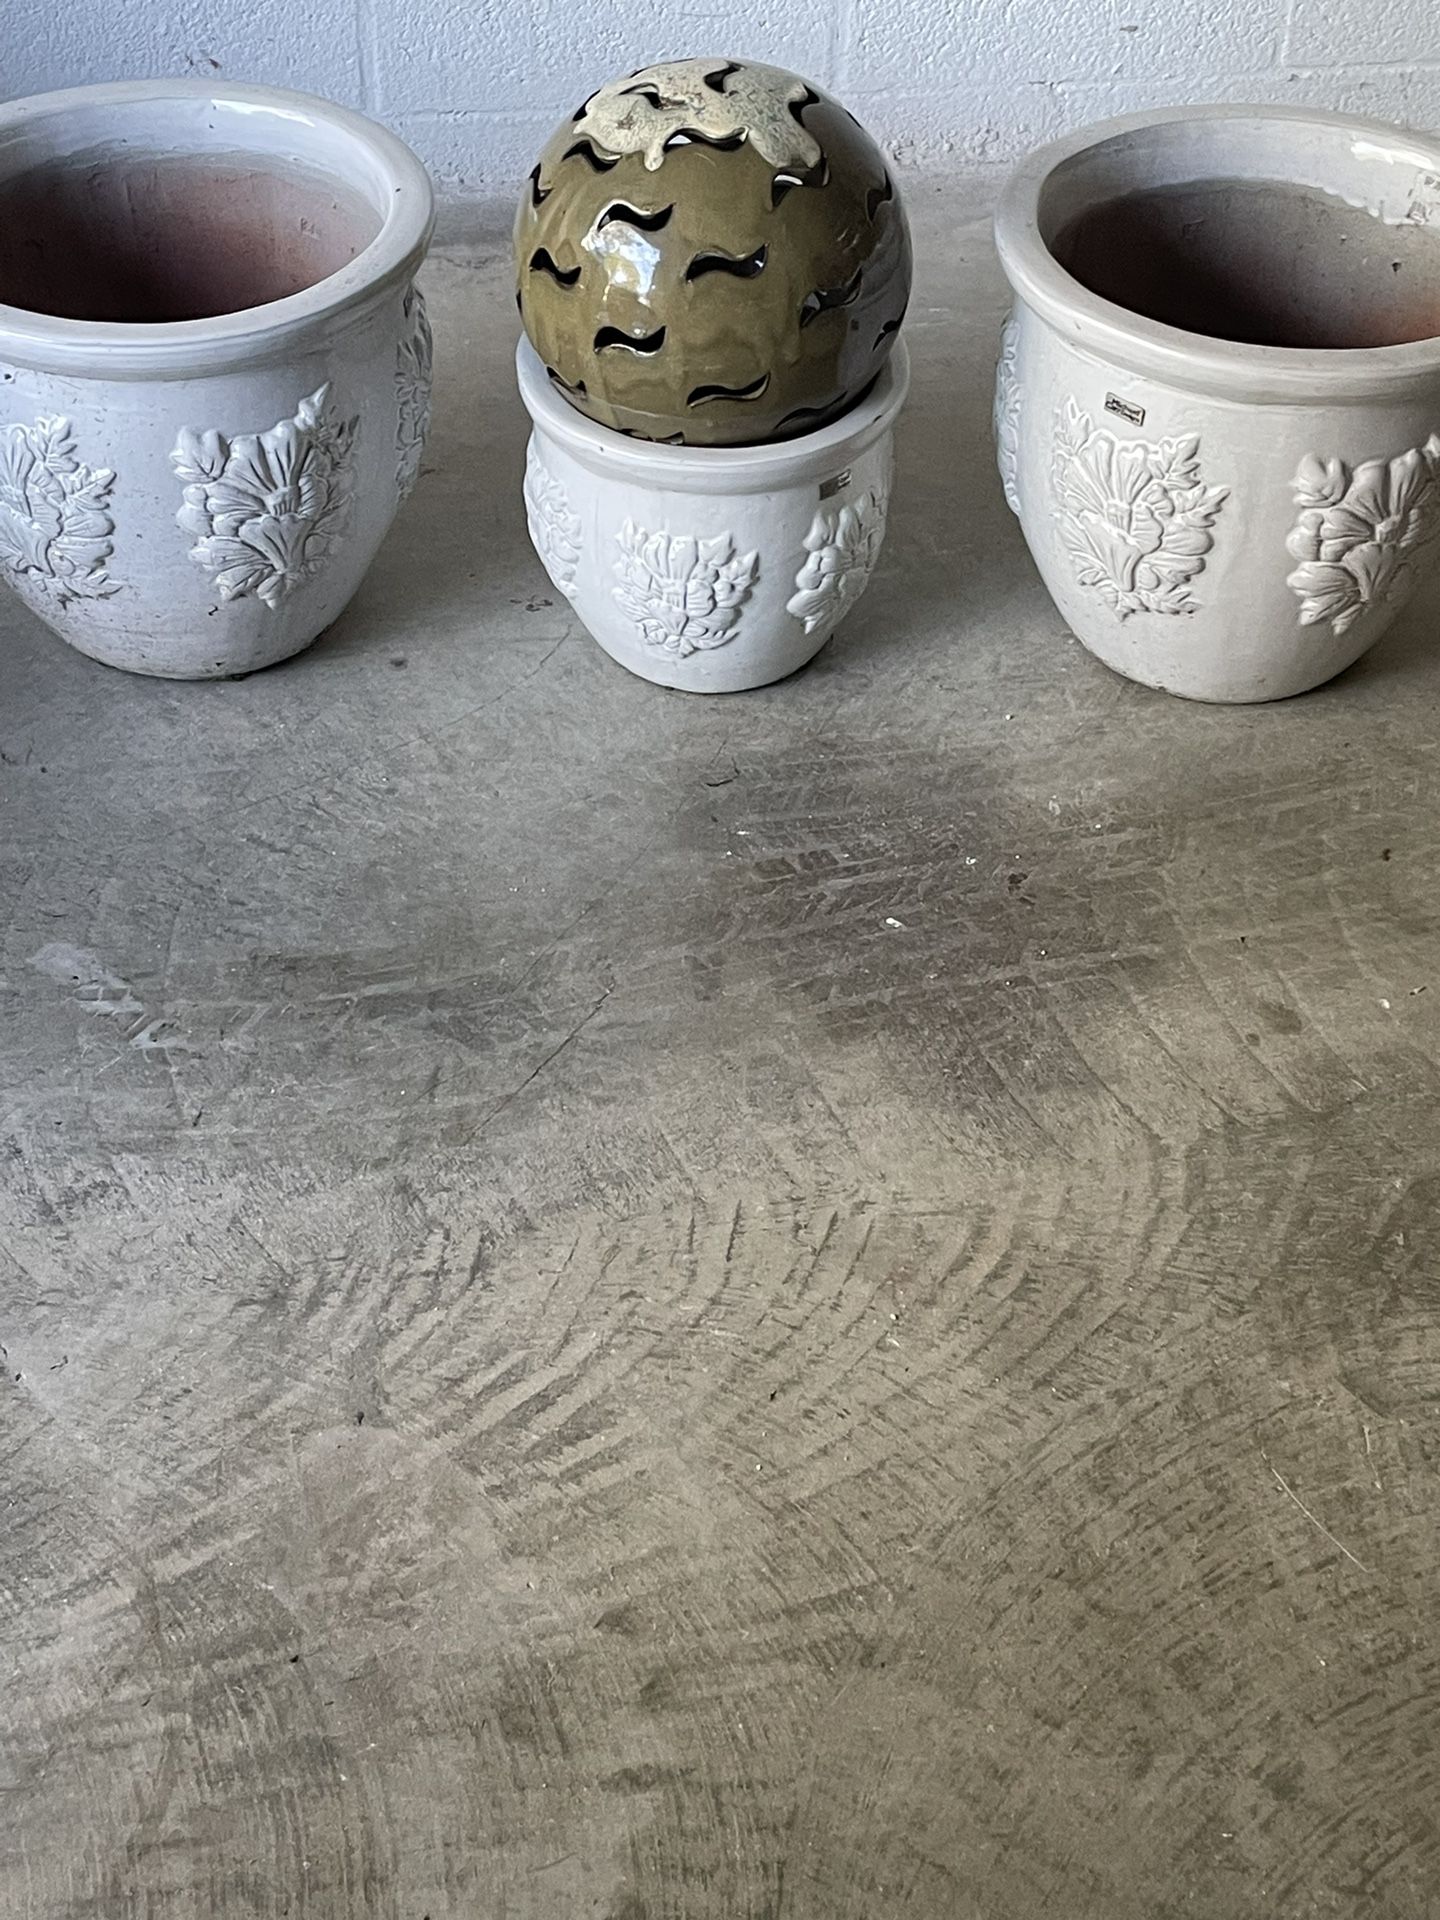 White Floral Pottery Ceramic  Price is for each one